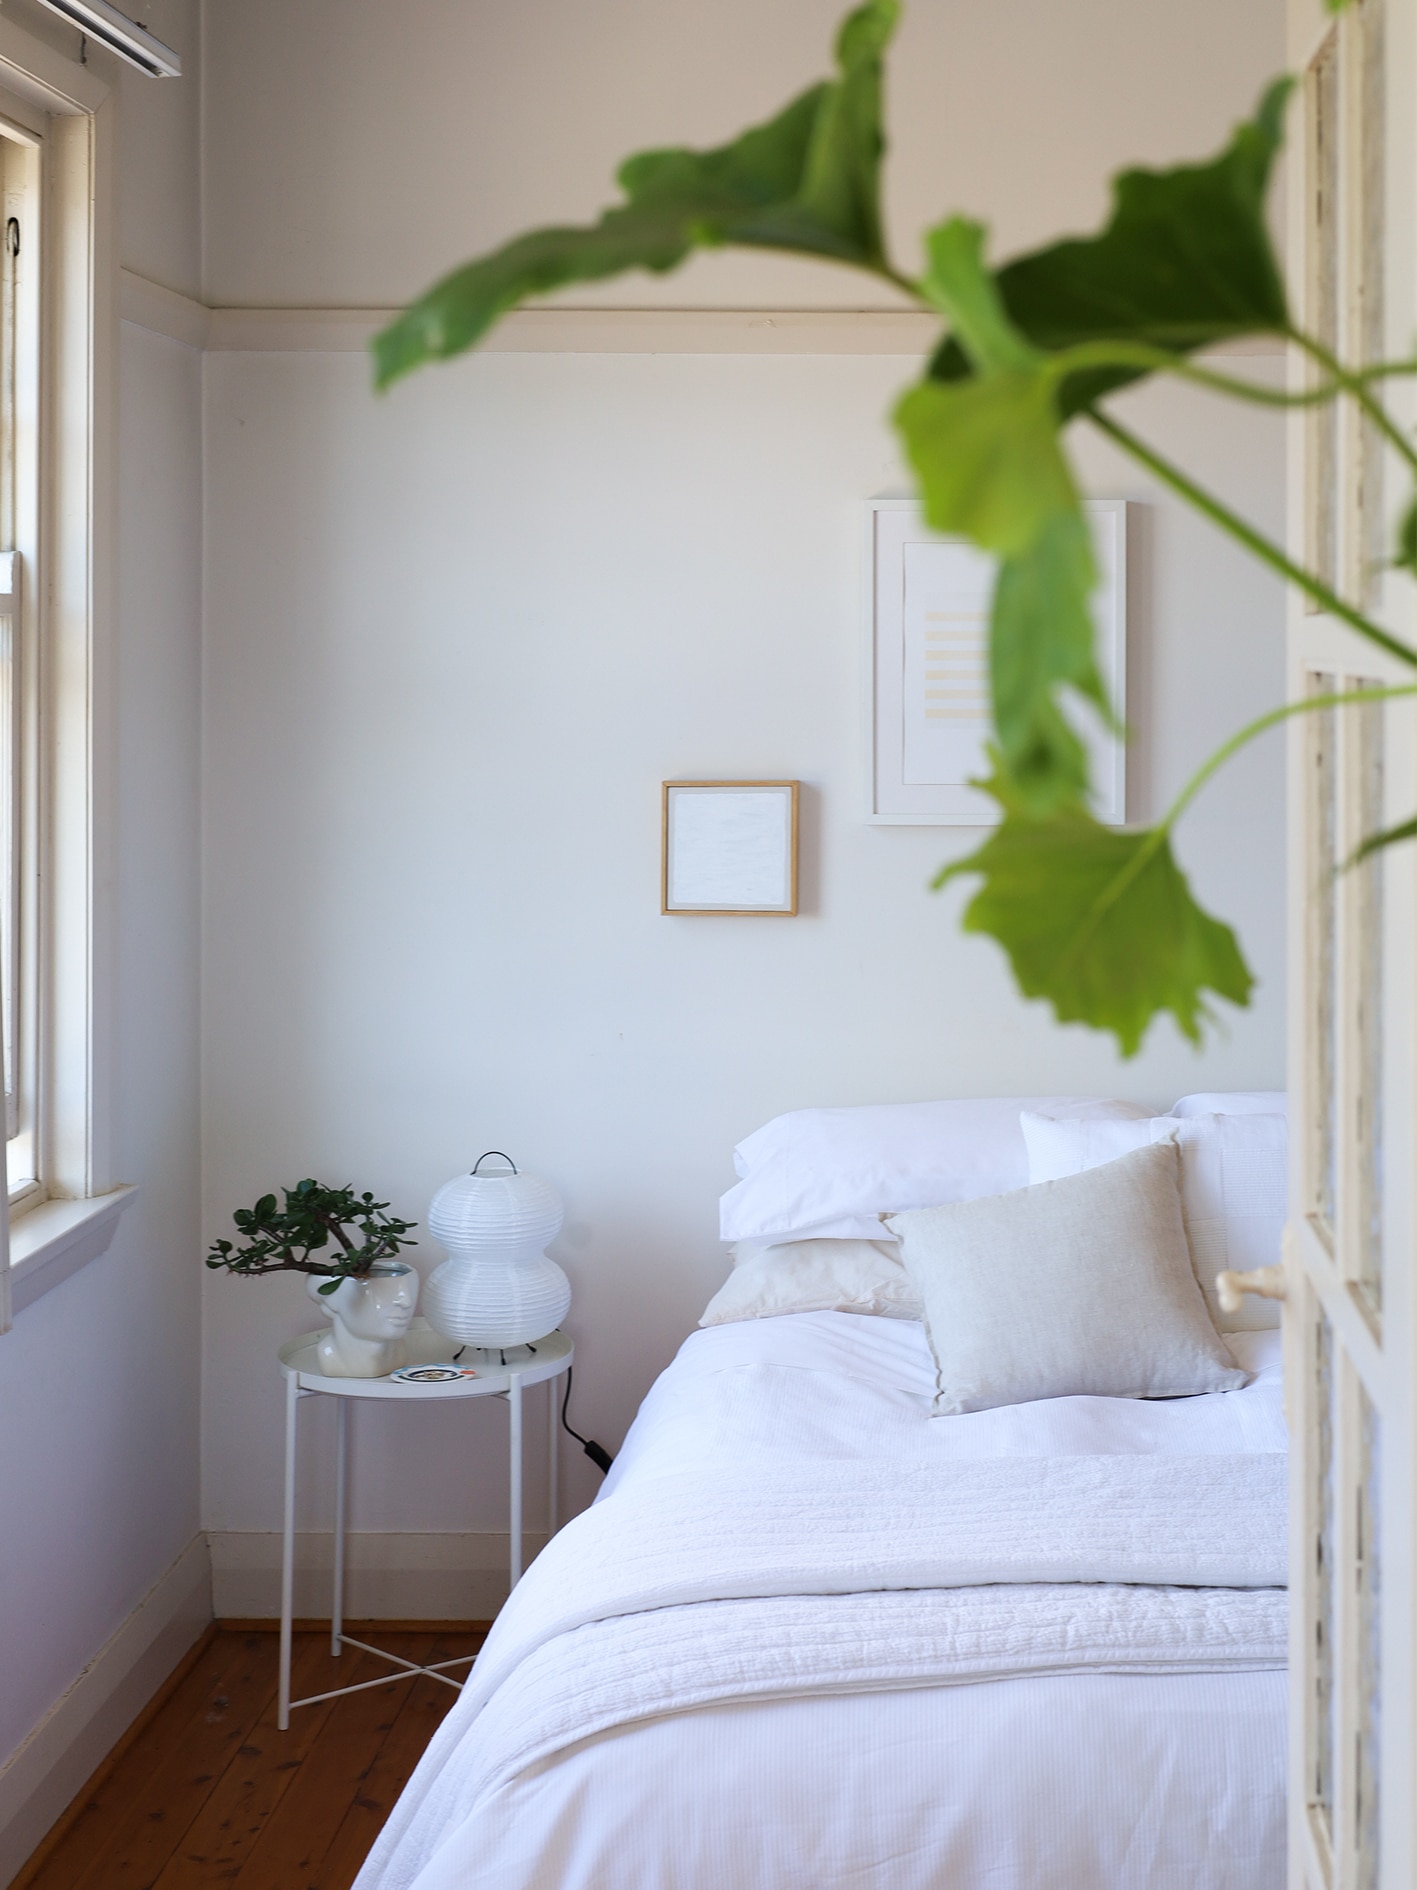 vertical shot through door into bedroom. window on left hand side. white bed styling with flax coloured cushion and sheet. green plant pokes through at front of image.